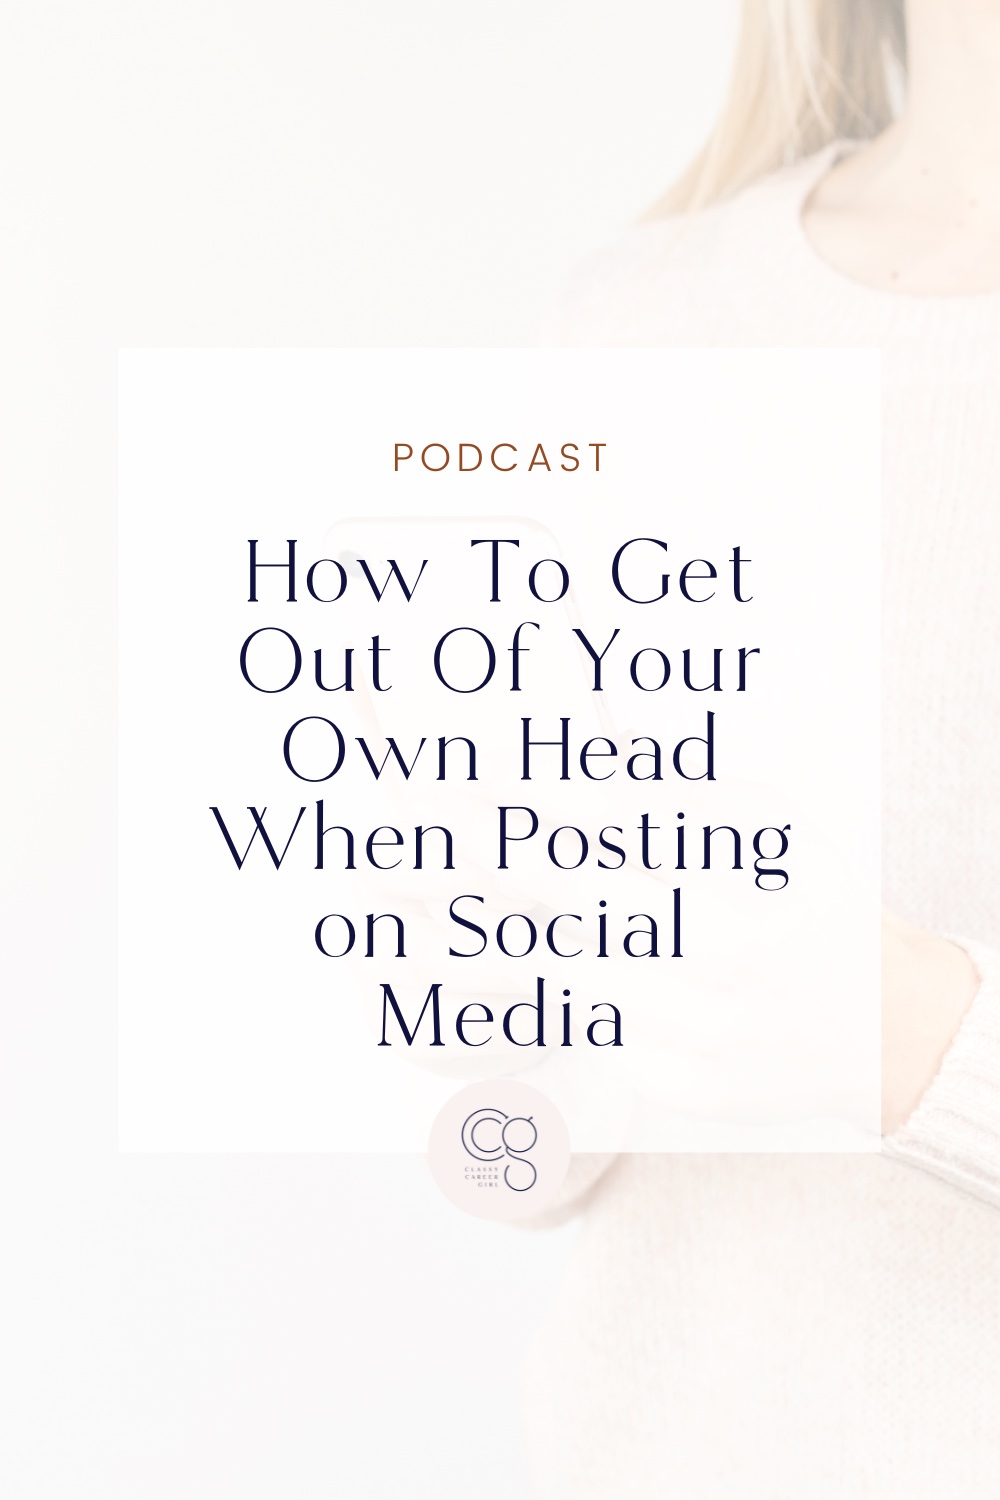 How To Get Out Of Your Own Head When Posting on Social Media